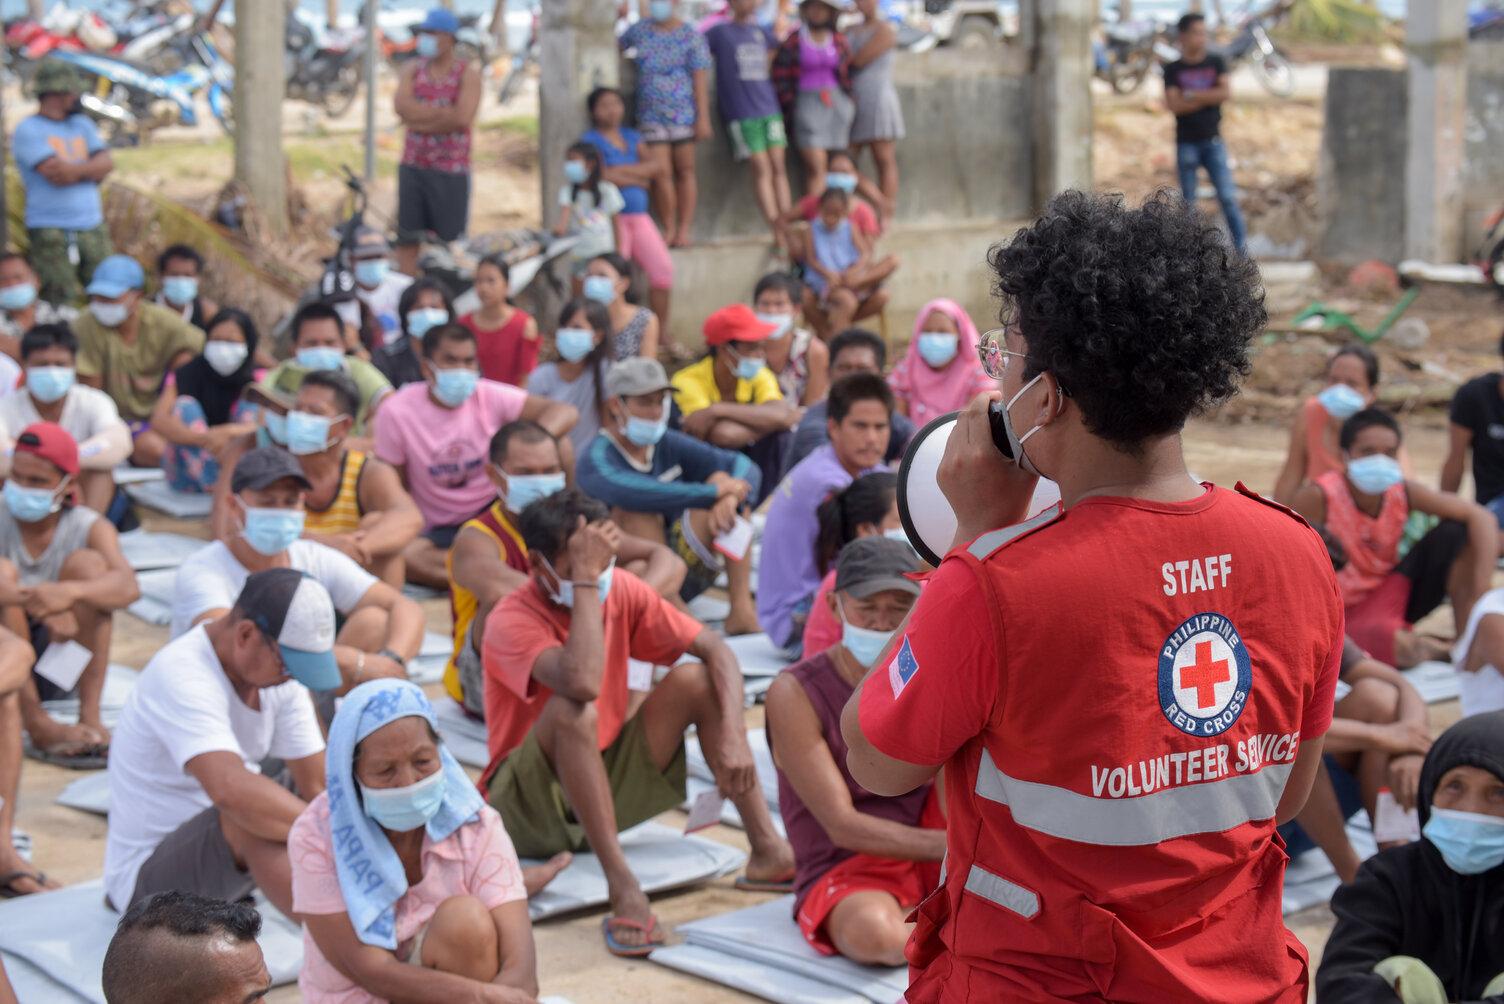 A Philippine Red Cross volunteer organizing relief distribution on Christmas Day, December 25, 2021, in Siargao , few days after Typhoon Rai hit the island. Anticipatory Action mechanisms were not triggered. Since then, lessons learnt from the typhoon have helped improve early action frameworks.